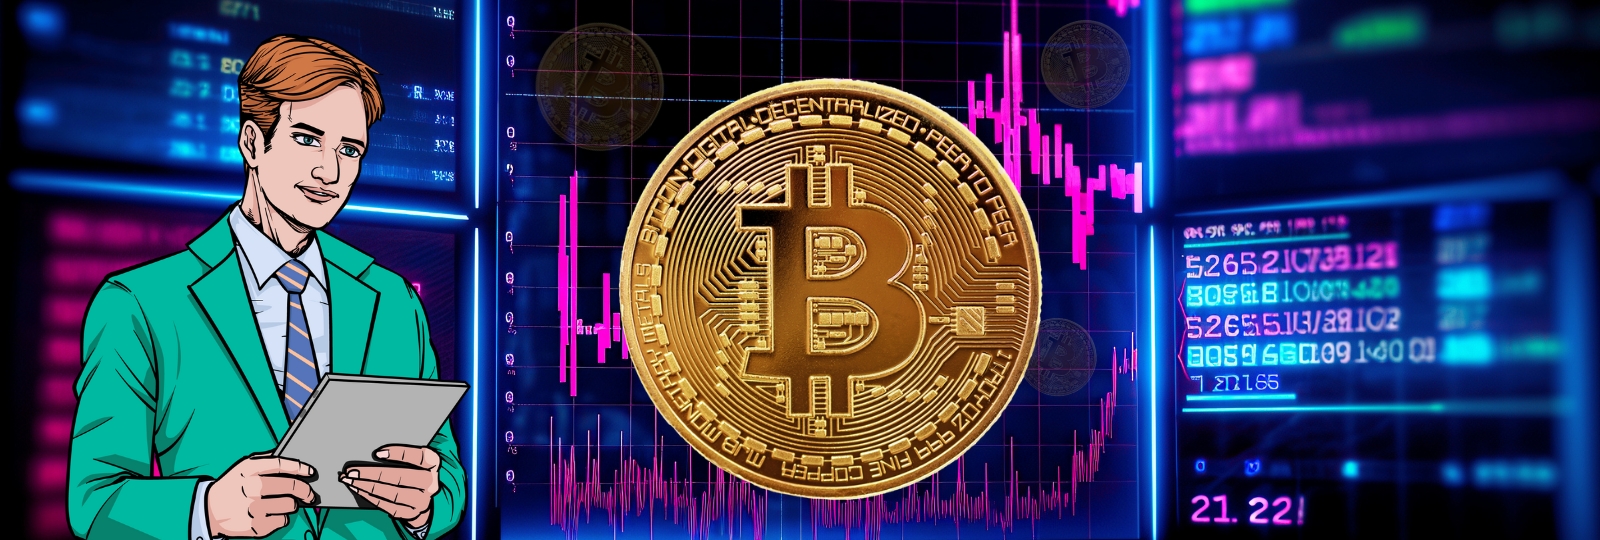 Liquidation of $300 million as Bitcoin wrestles with the market